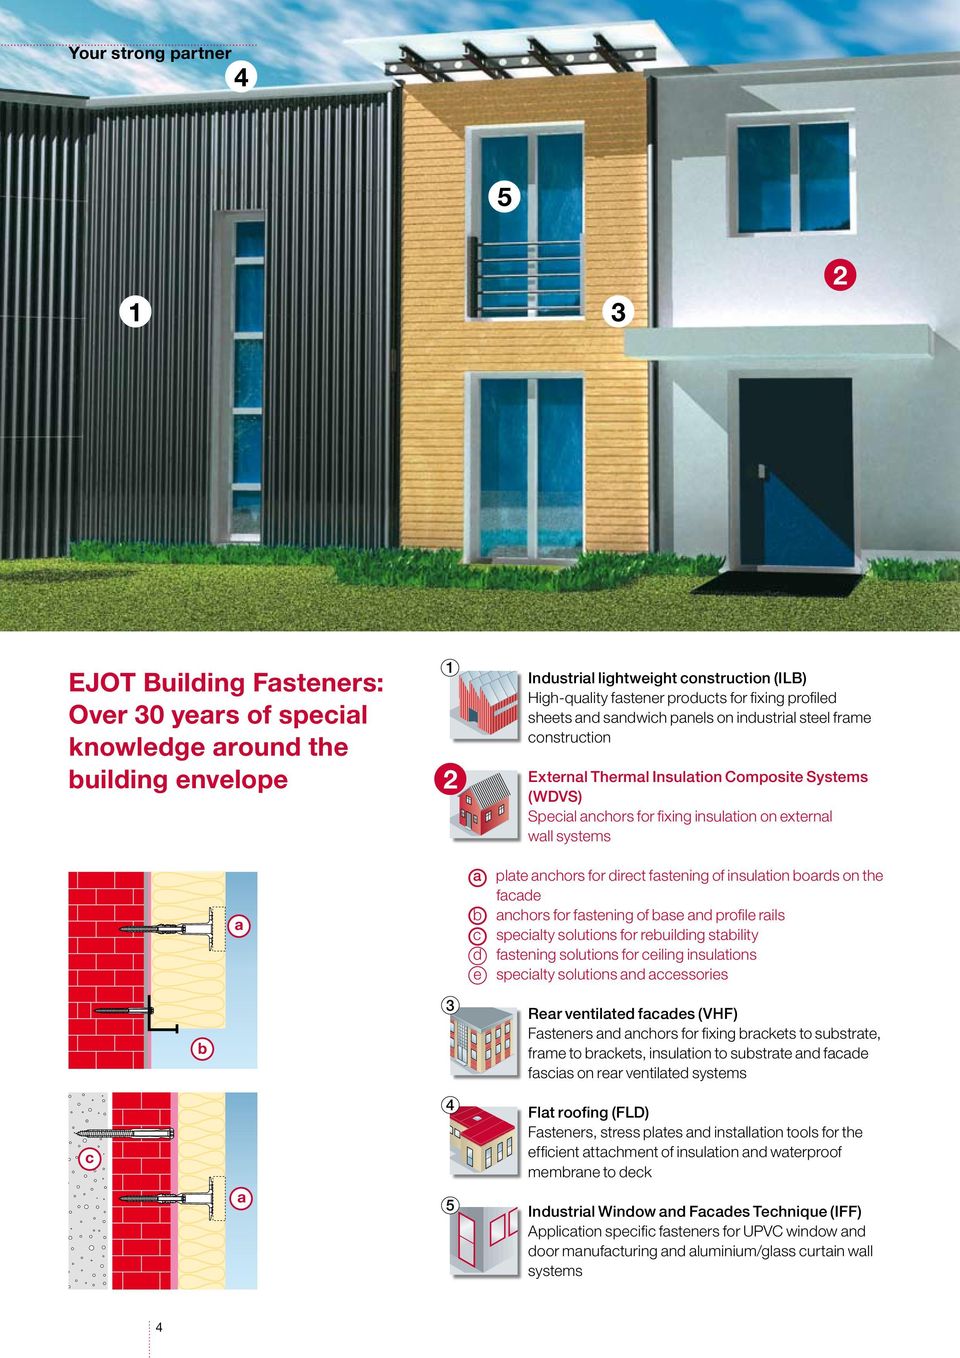 wall systems a plate anchors for direct fastening of insulation boards on the facade b anchors for fastening of base and profile rails c specialty solutions for rebuilding stability d fastening